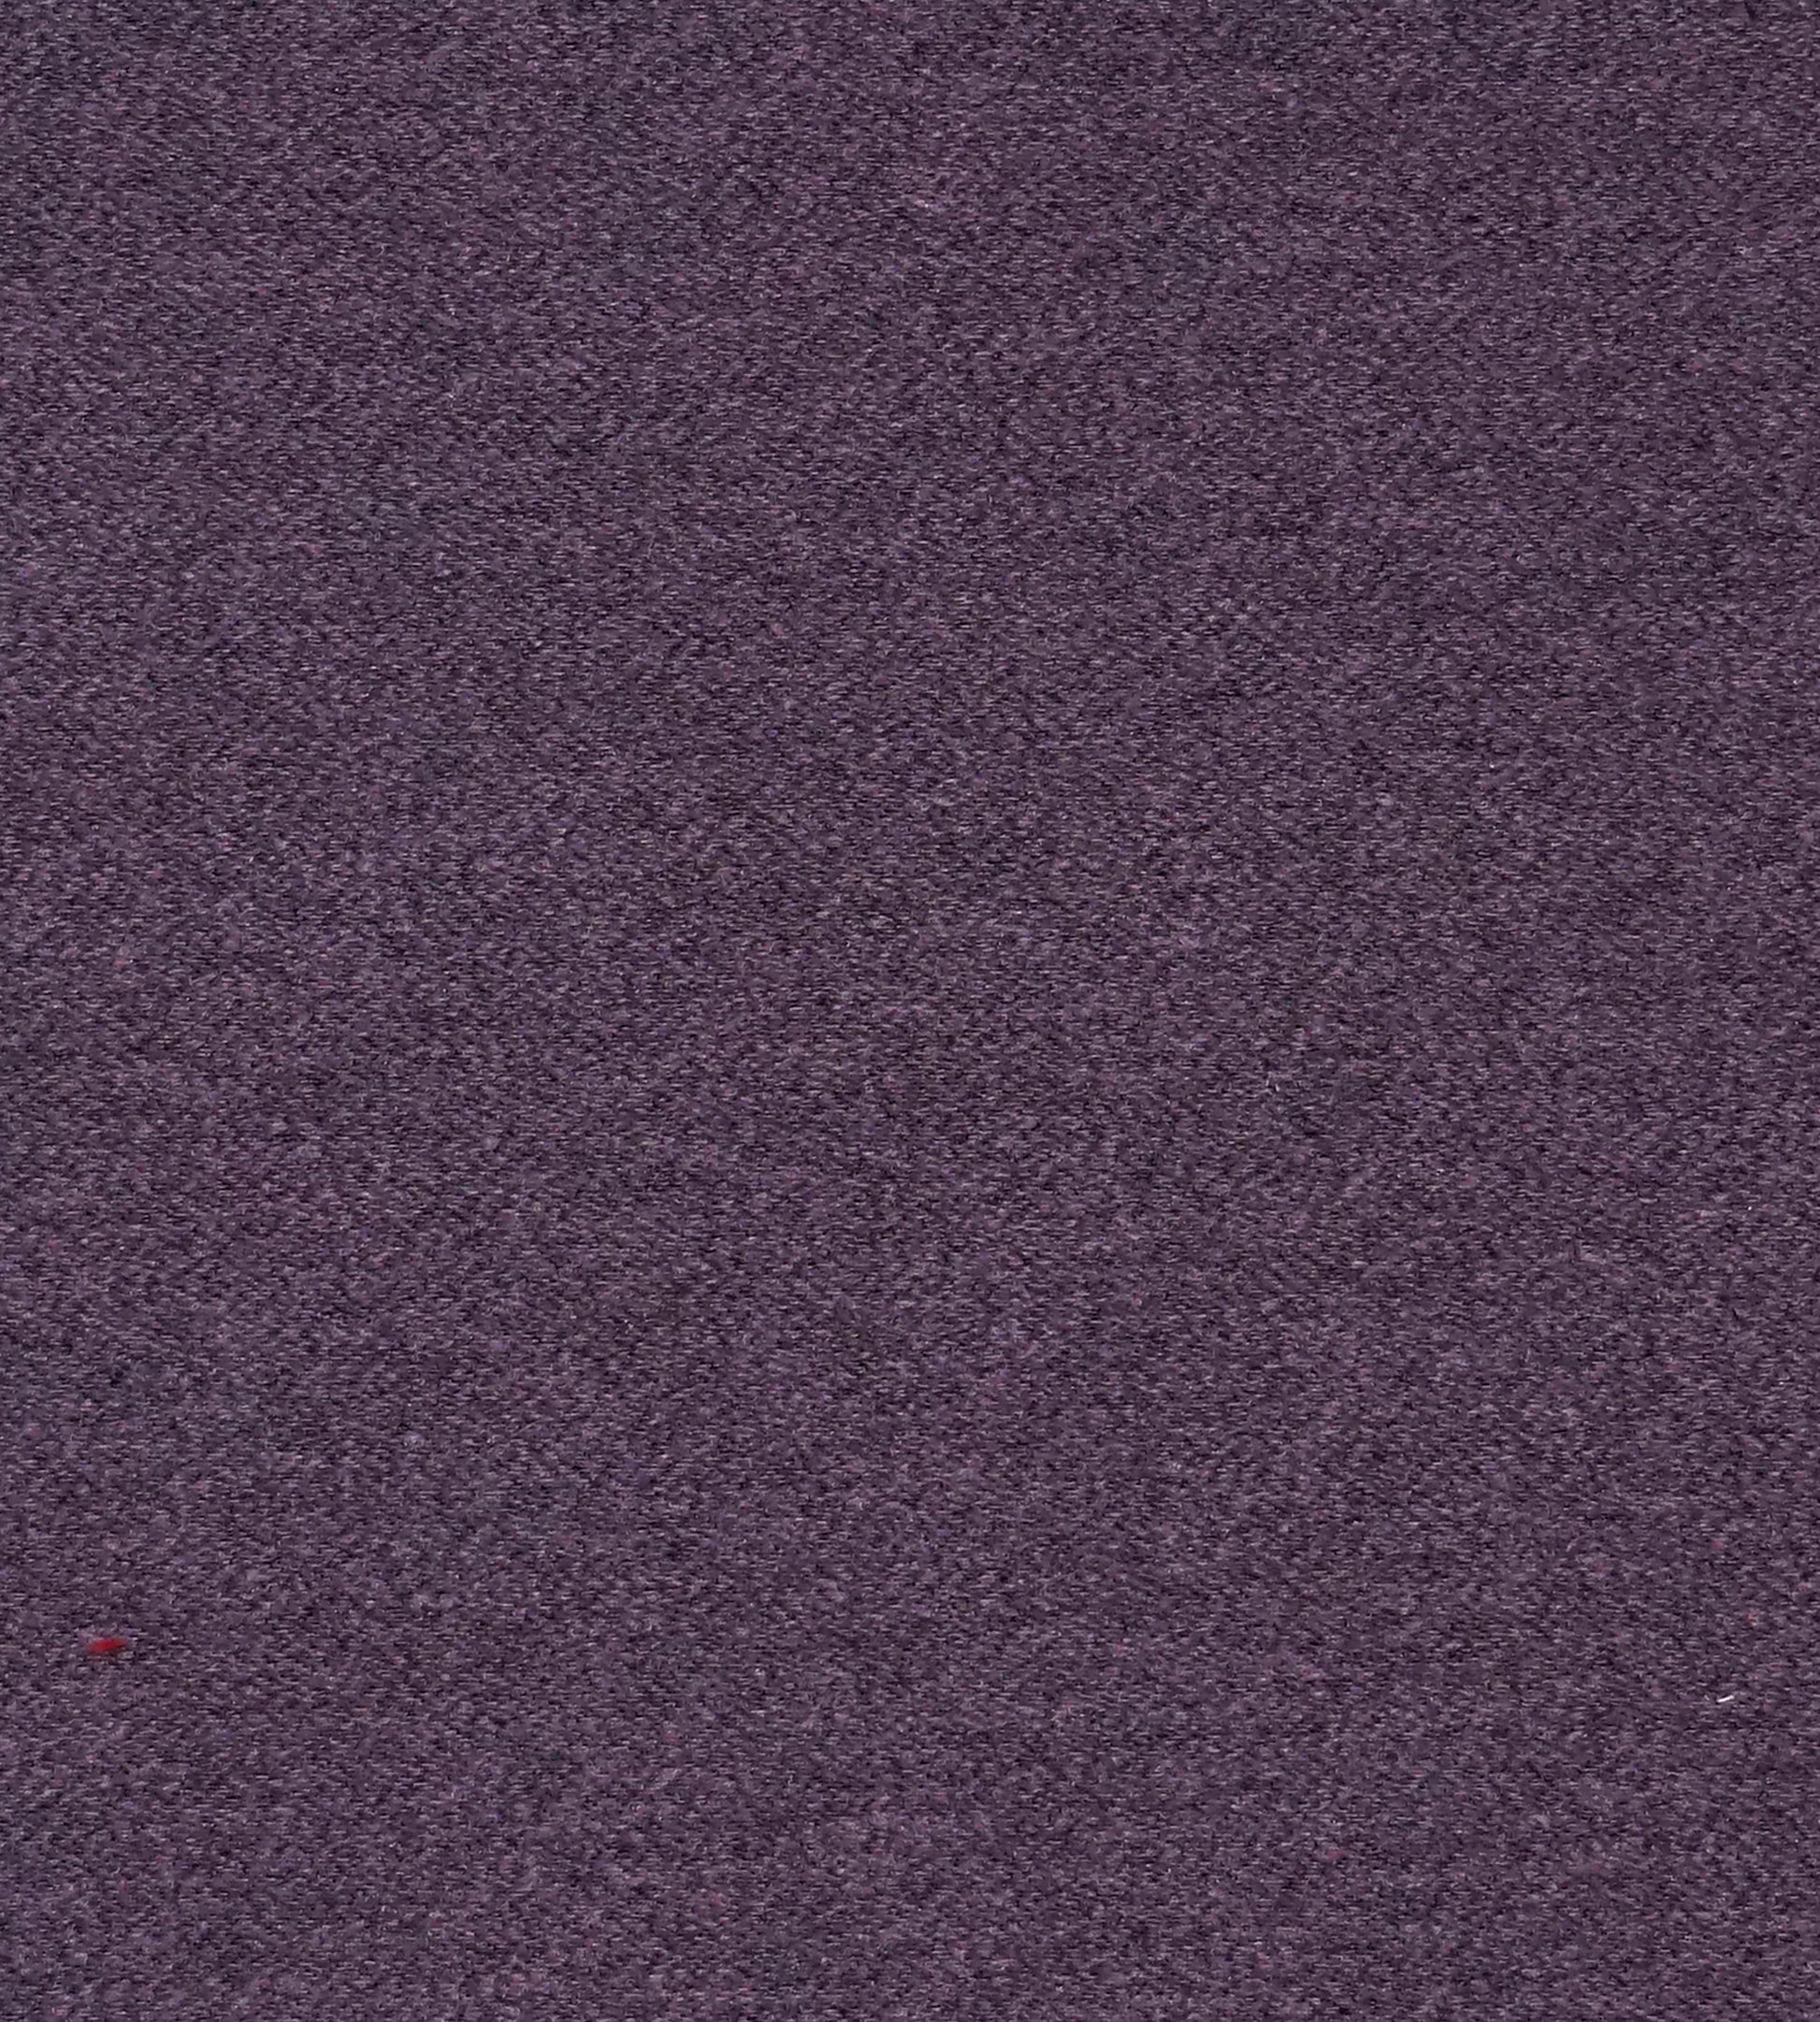 Purchase Scalamandre Fabric Product# SC 001127248, Dapper Flannel Orchid 1